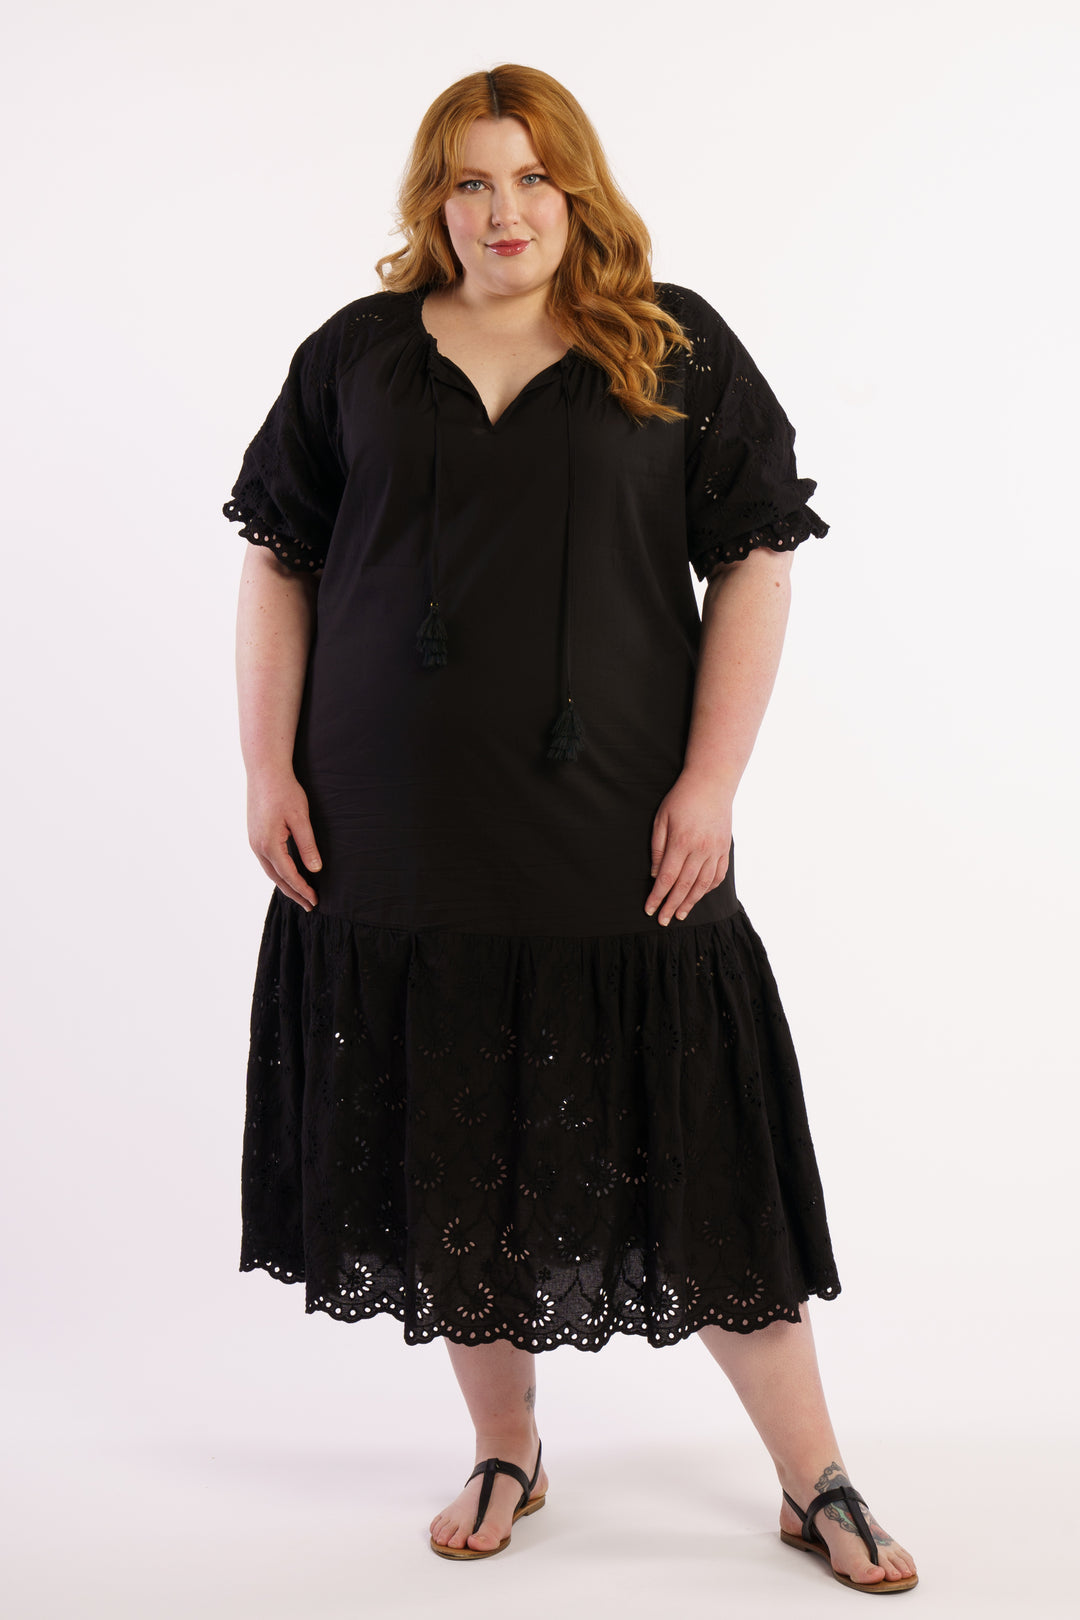 Summer Breeze Broidery Dress - Black - STOCK AVAILABLE - SIZE XS (12/14) & S (14/16)